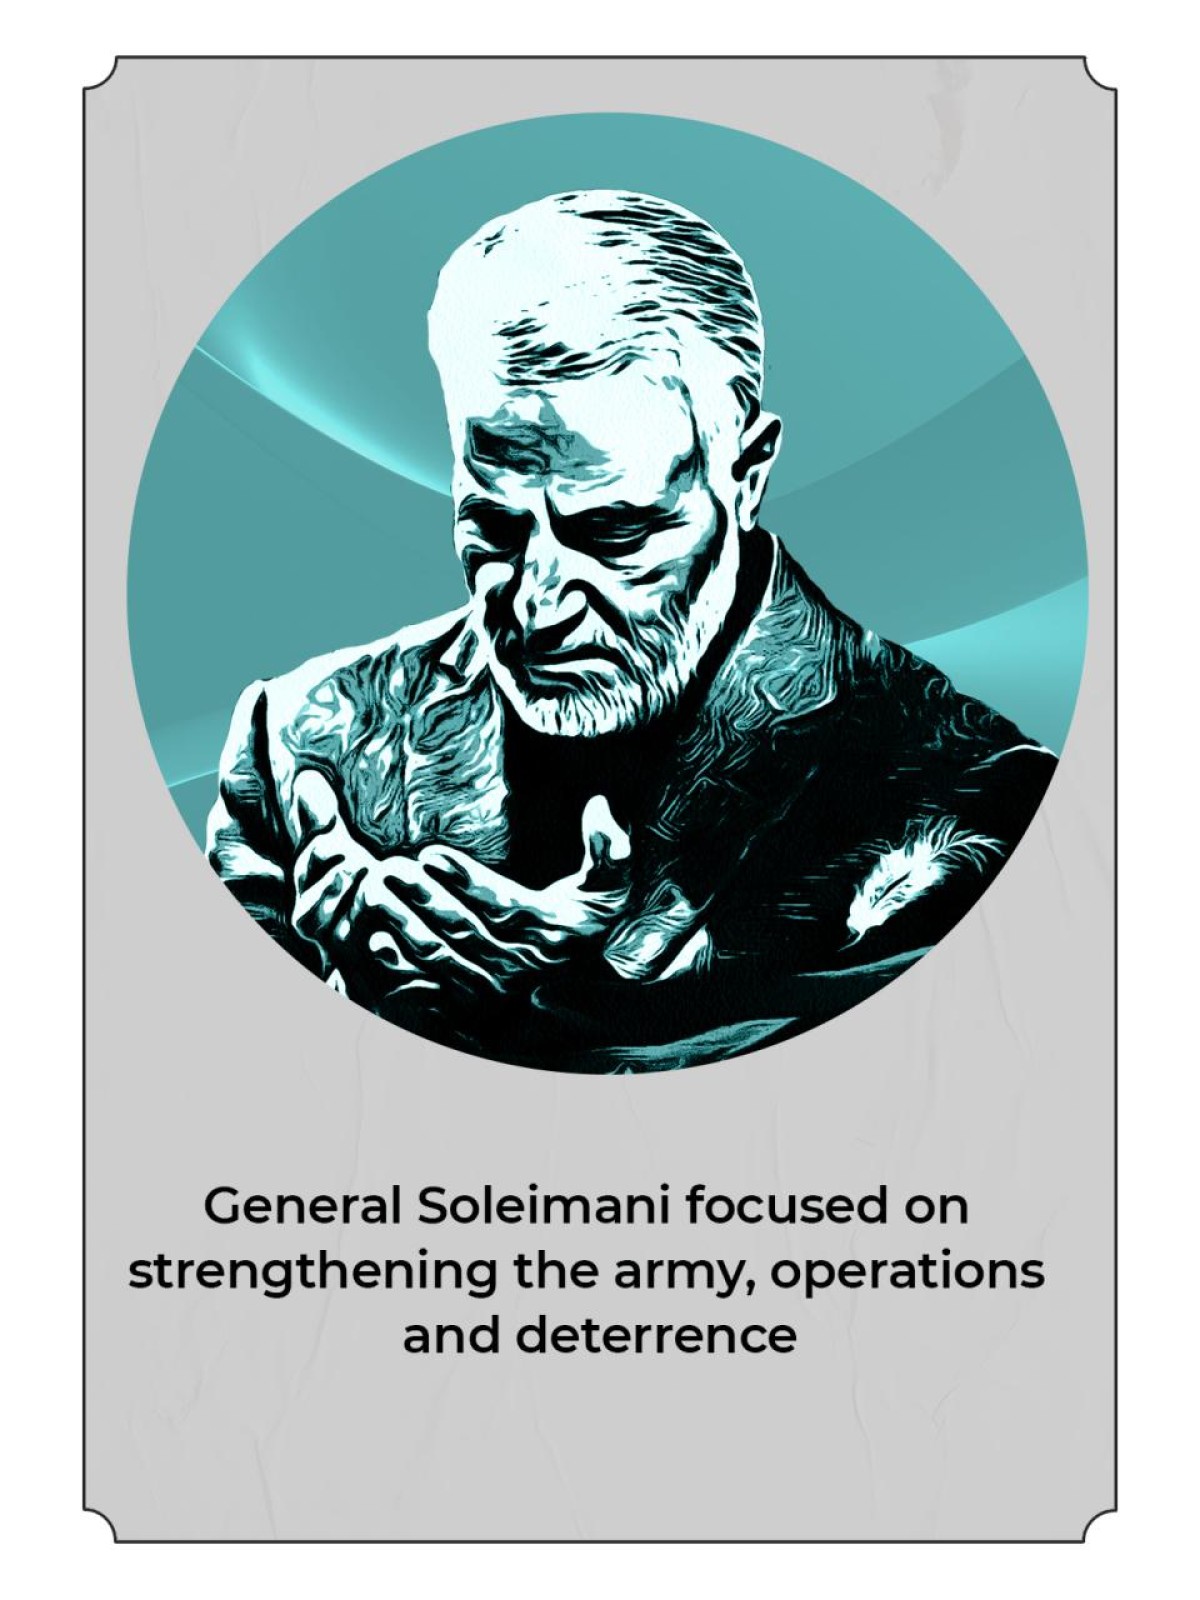 General Soleimani focused on strengthening the army, operations and deterrence